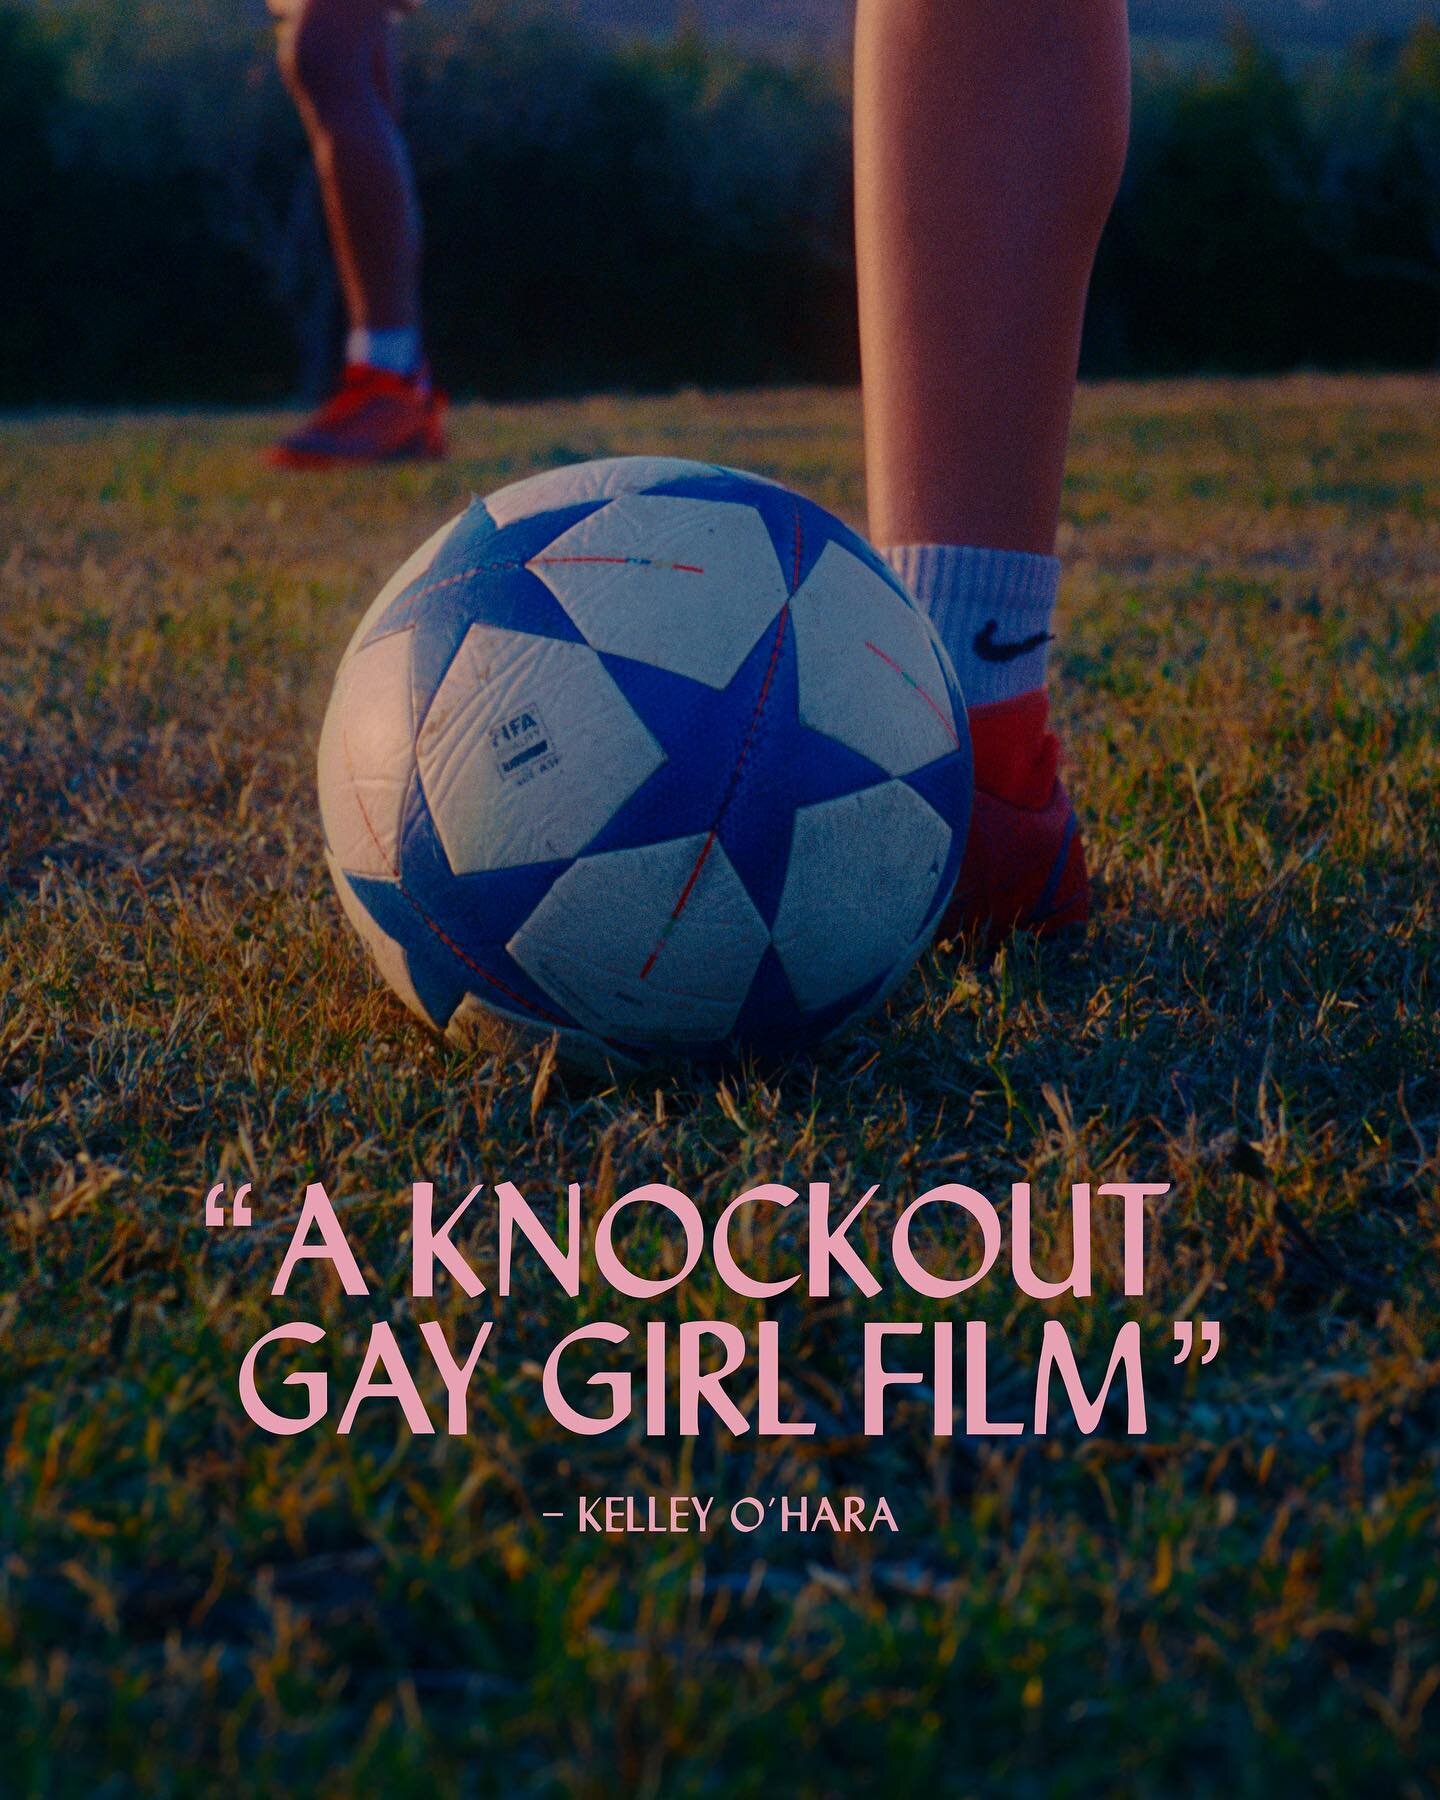 ⚽️💖 we are proud to announce @kelleyohara as an EP on Ripe! 🏳️&zwj;🌈🍑
.
soccer serves as an emotional landscape for queer love in @ripe__film and there is really no better person to partner with than a 2x World Cup winner &amp; Olympic gold medal